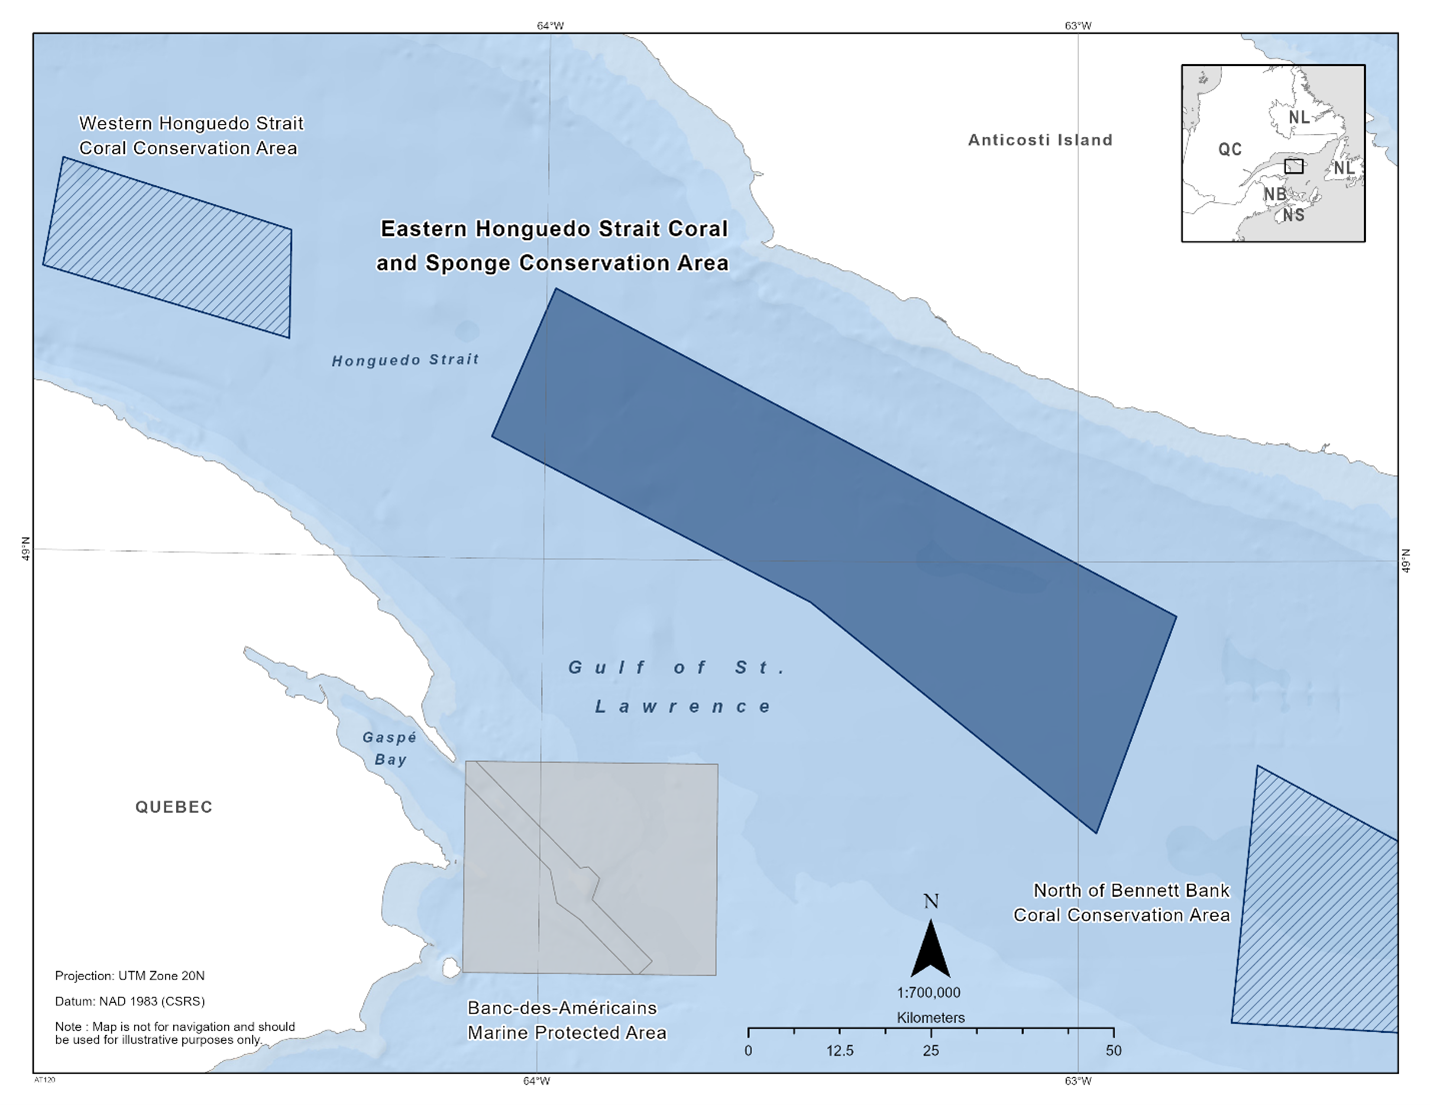 Map of the Eastern Honguedo Strait Coral and Sponge Conservation Area depicted in dark blue. The map also features nearby marine refuges with dark blue diagonal lines (Western Honguedo Strait Coral Conservation Area & North of Bennett Bank Coral Conservation Area)